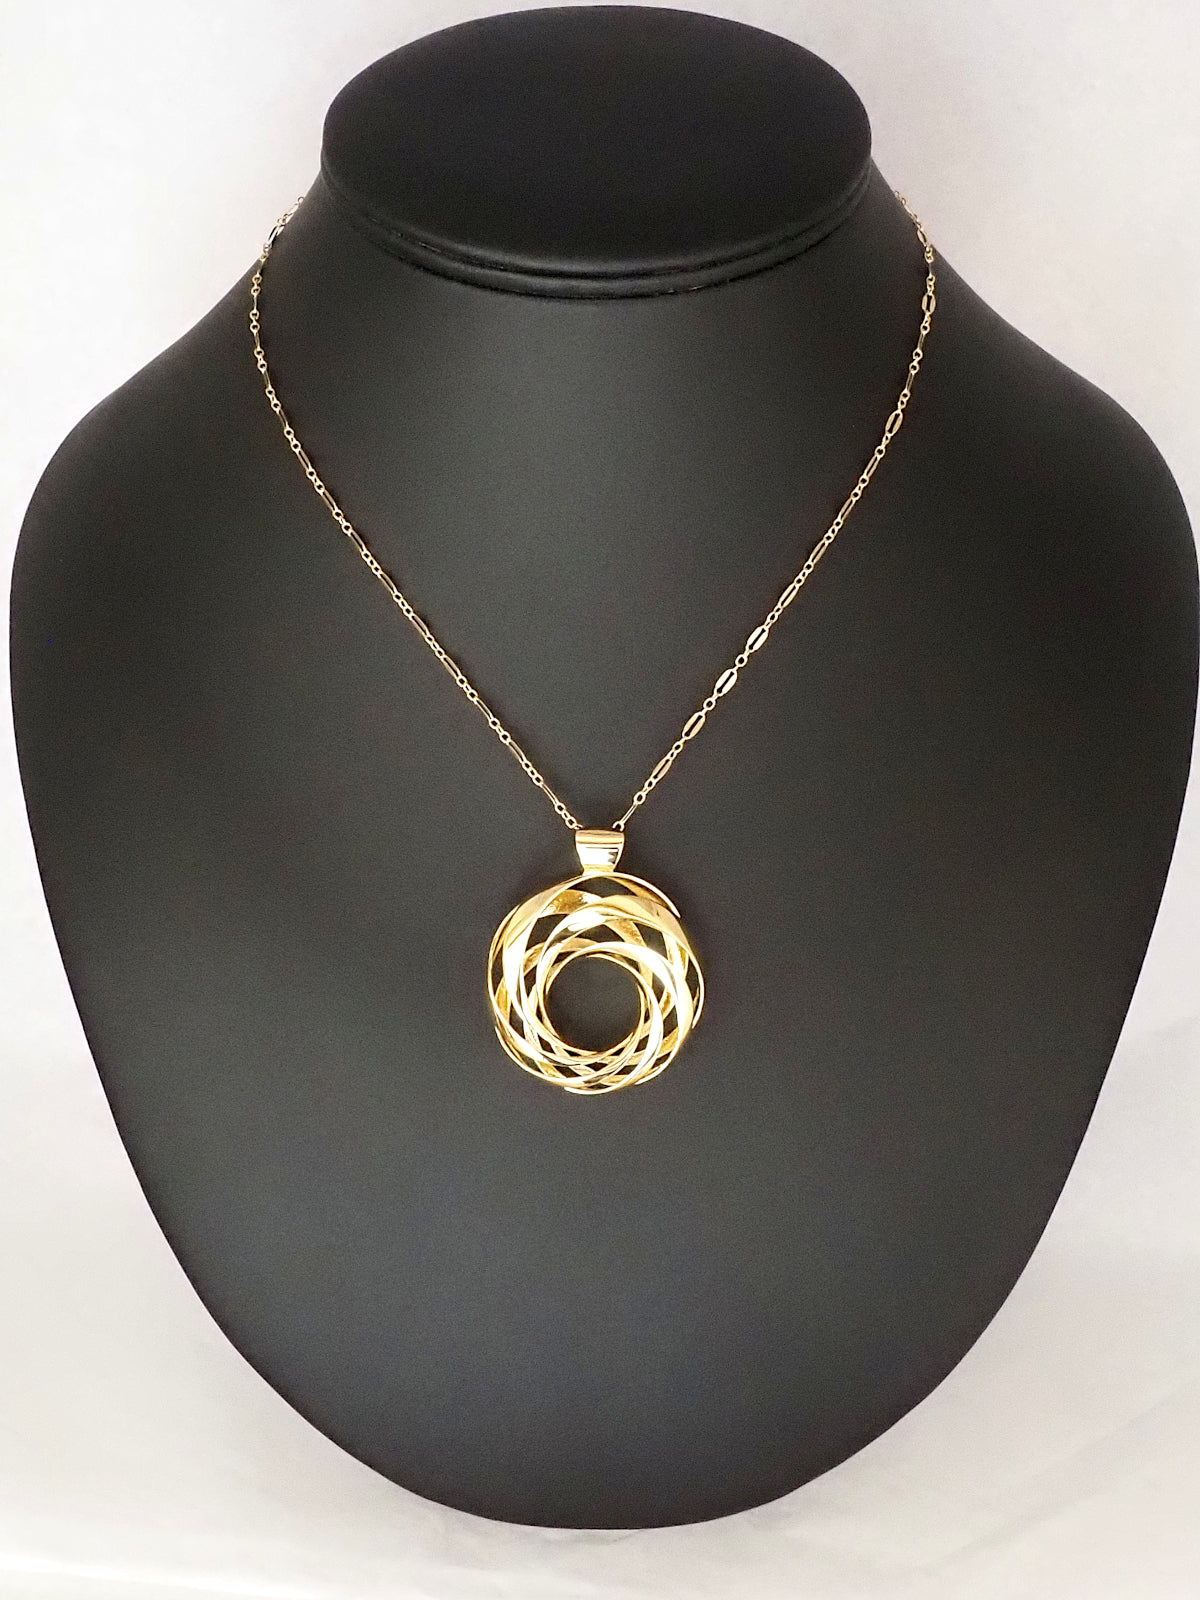 A 35mm gold-plated brass cyclide pendant with a gold long-and-short loop chain on a necklace display.